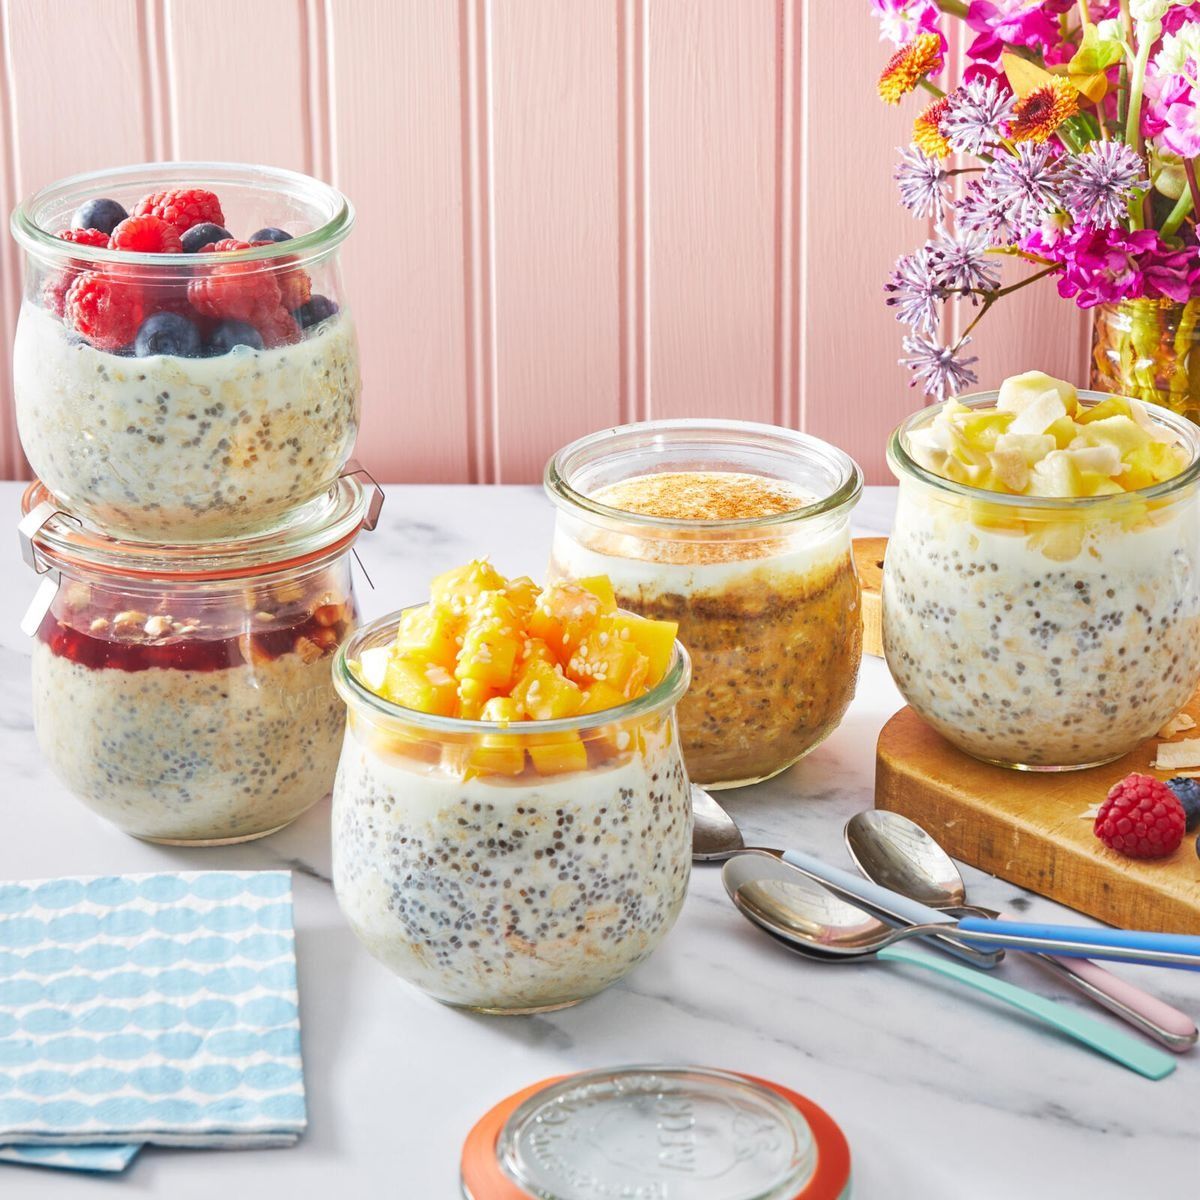 20 Best Overnight Oats Recipes - How to Make Overnight Oats